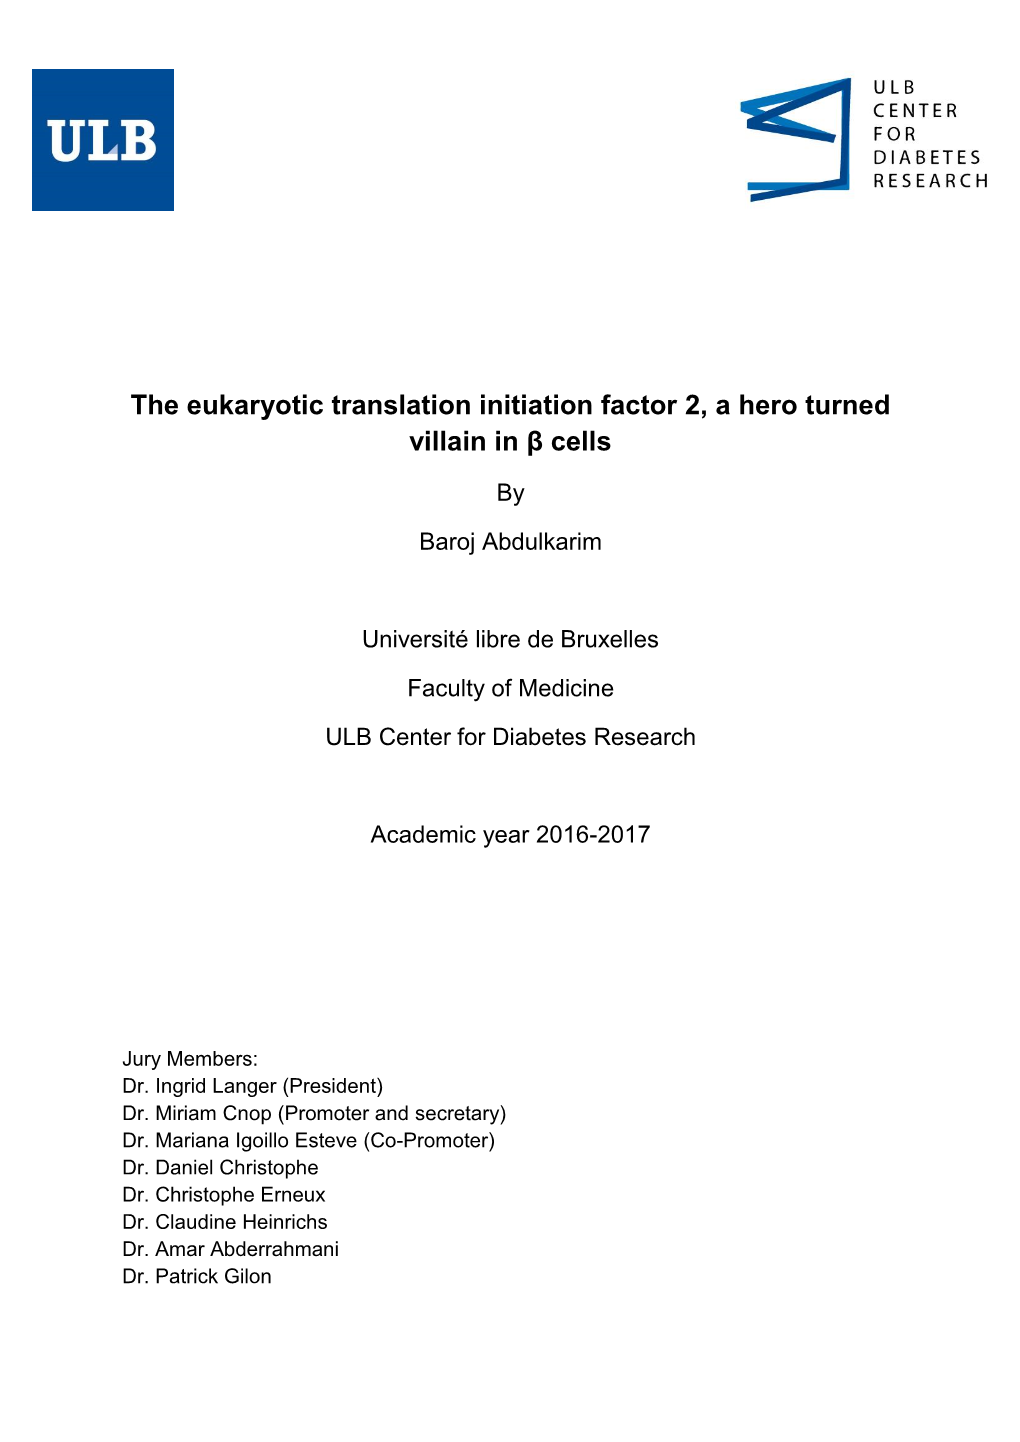 The Eukaryotic Translation Initiation Factor 2, a Hero Turned Villain in Β Cells